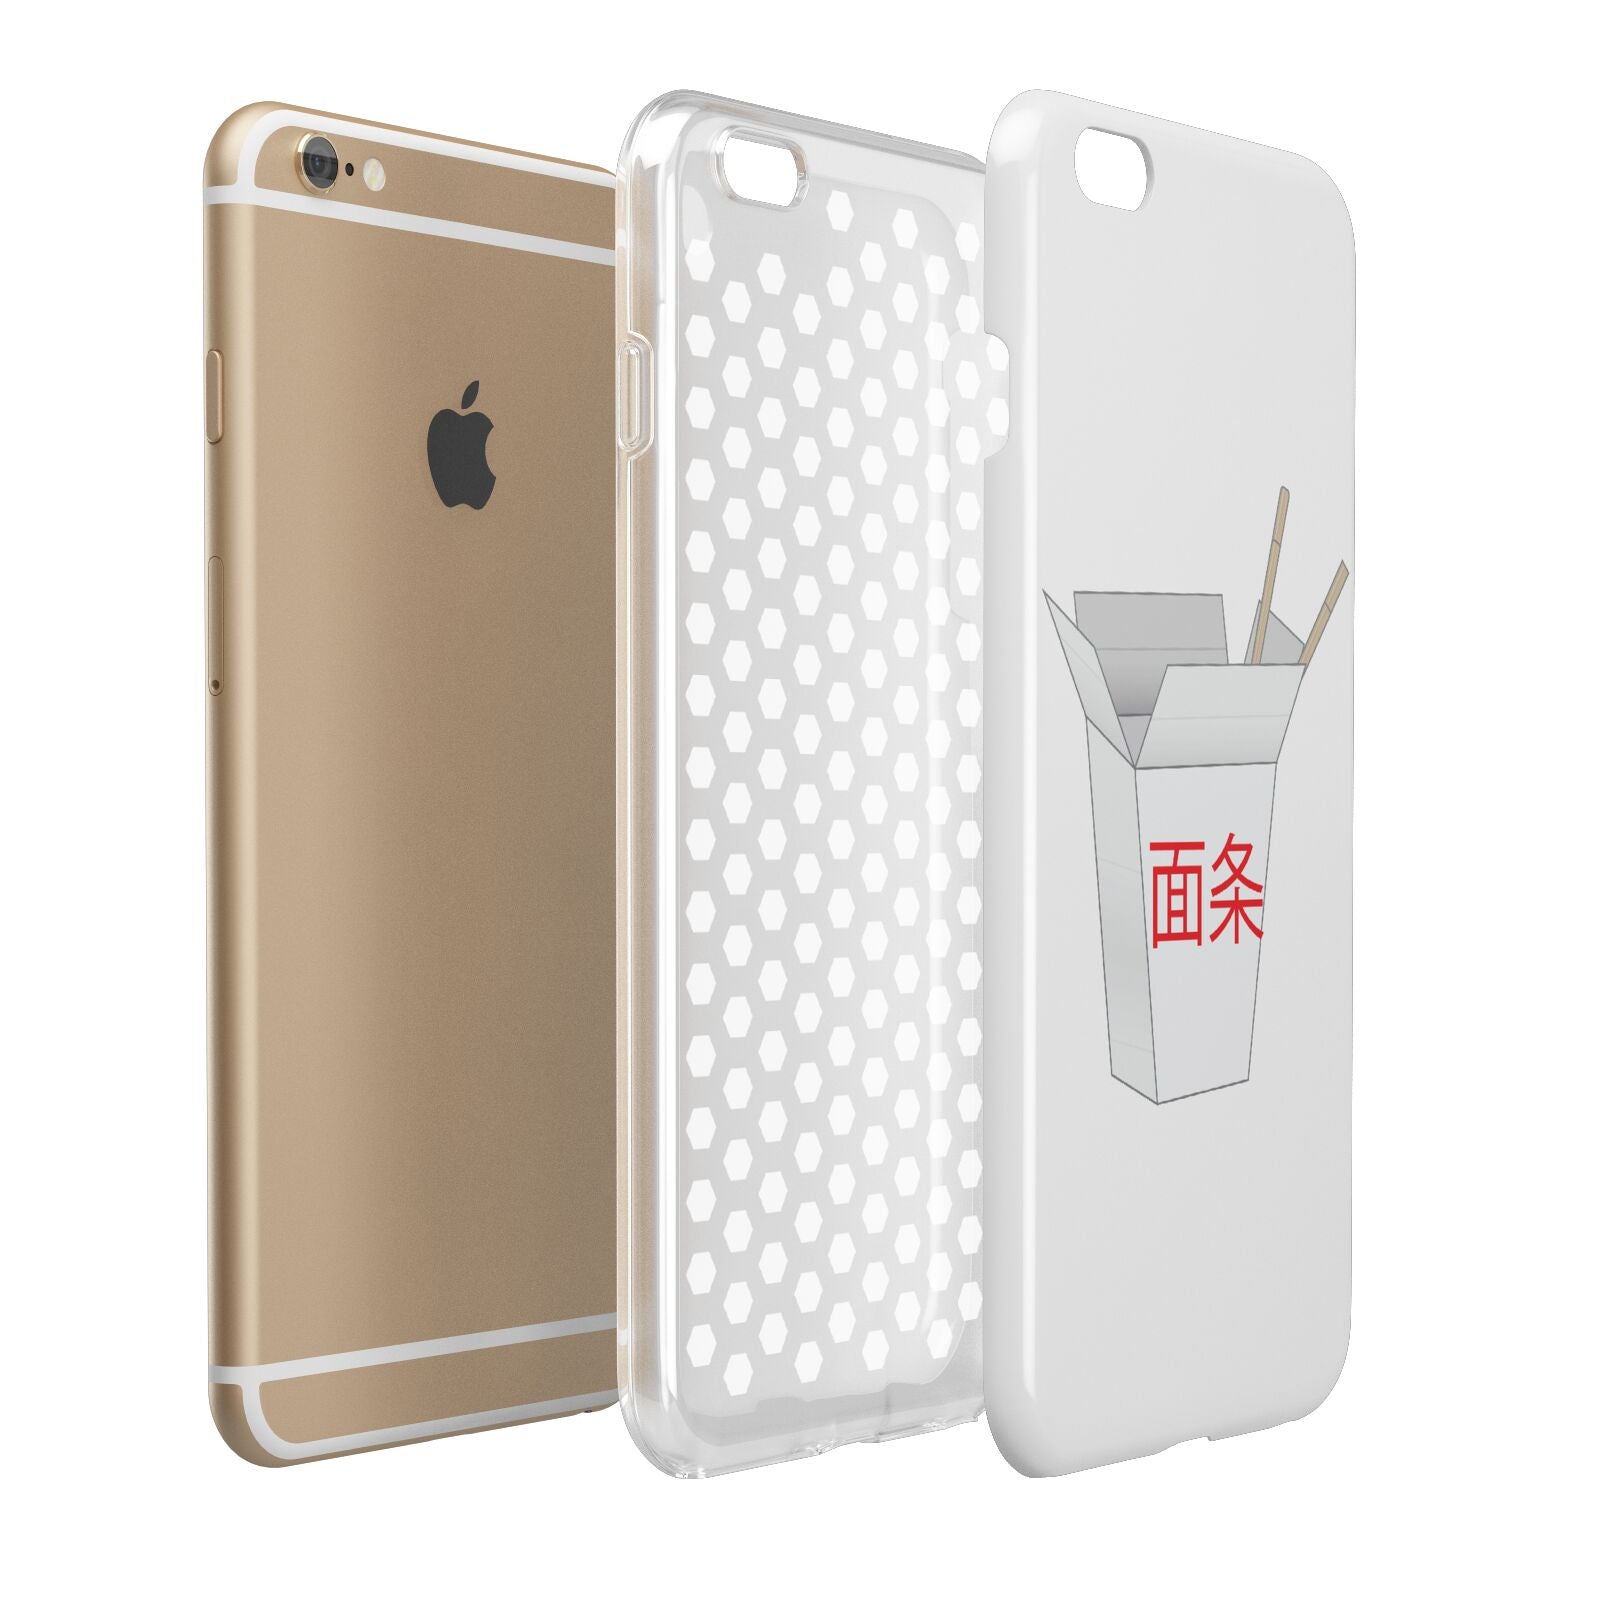 Chinese Takeaway Box Apple iPhone 6 Plus 3D Tough Case Expand Detail Image